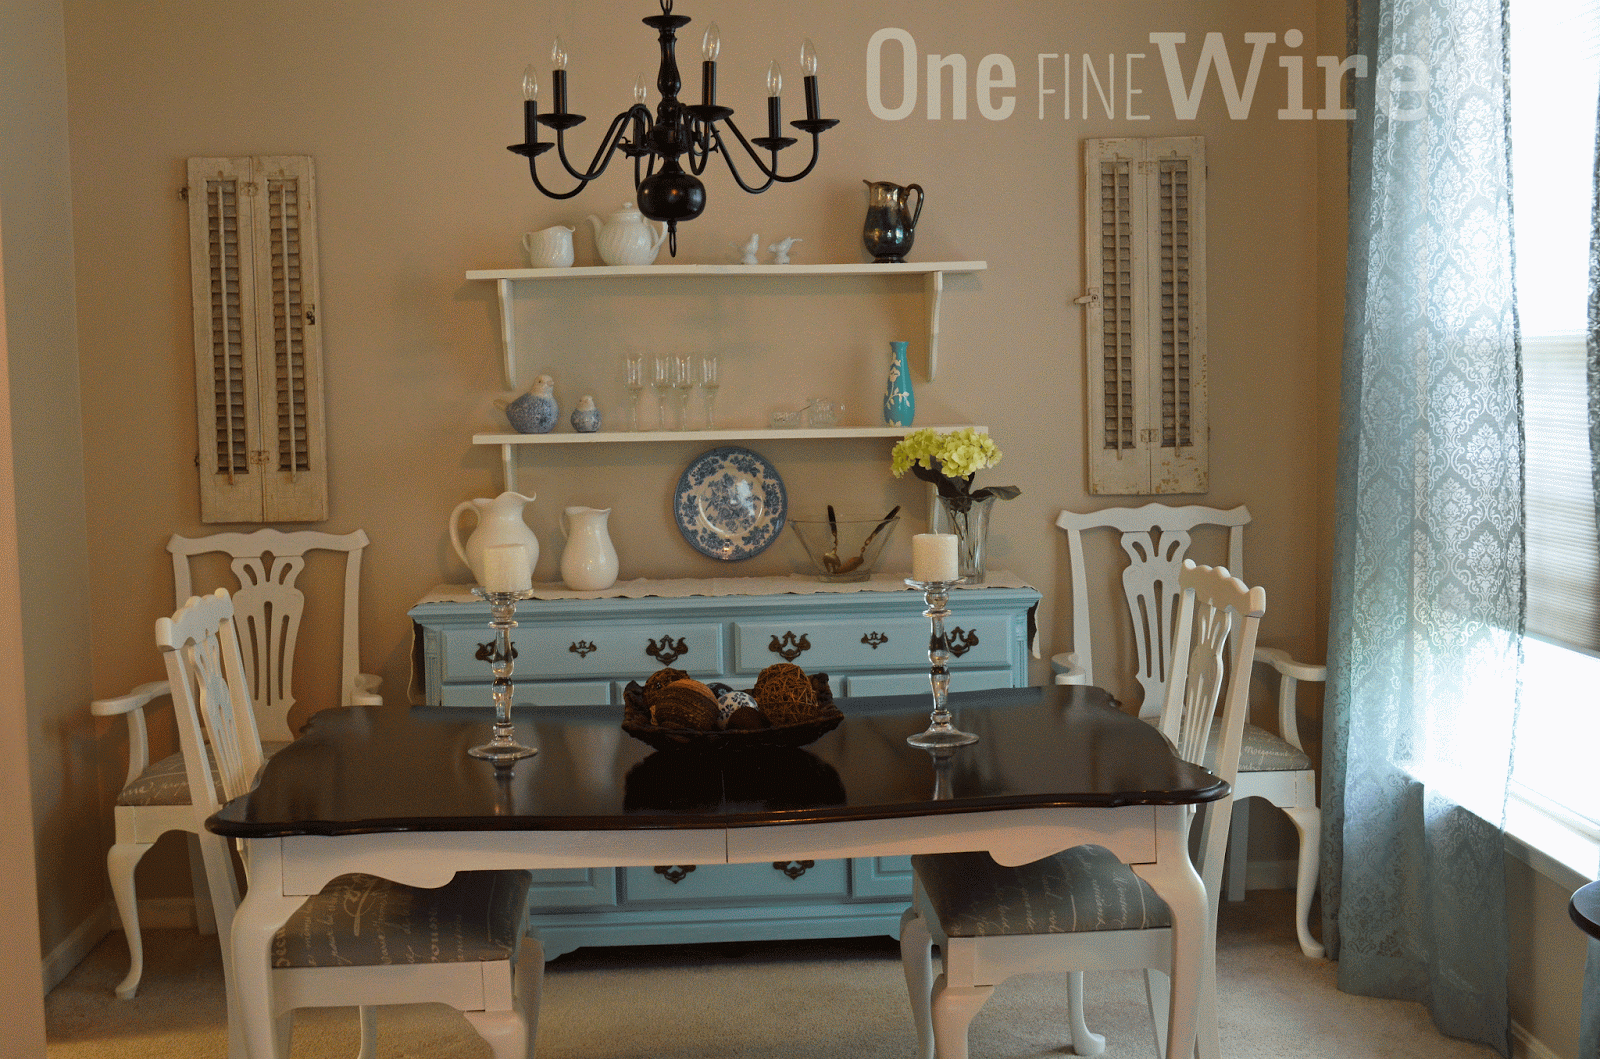 One Fine Wire: Shabby Chic Dining Room Reveal!